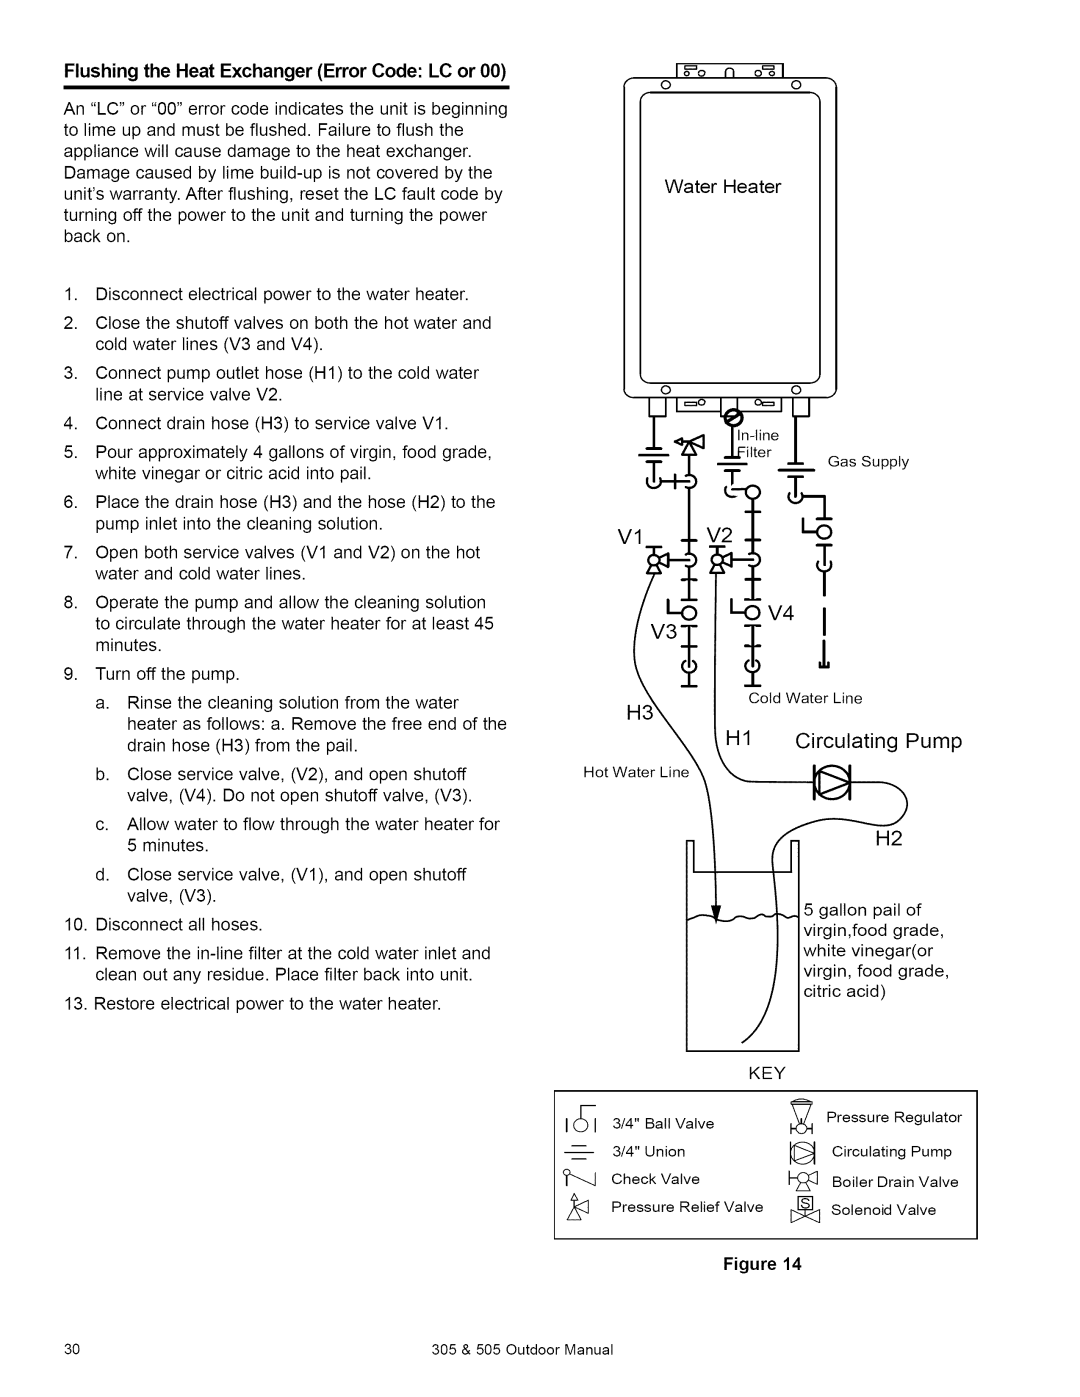 Kenmore 505, 305 owner manual V1, H1 Circulating Pump, Flushing the Heat Exchanger ErrorCode LC or 